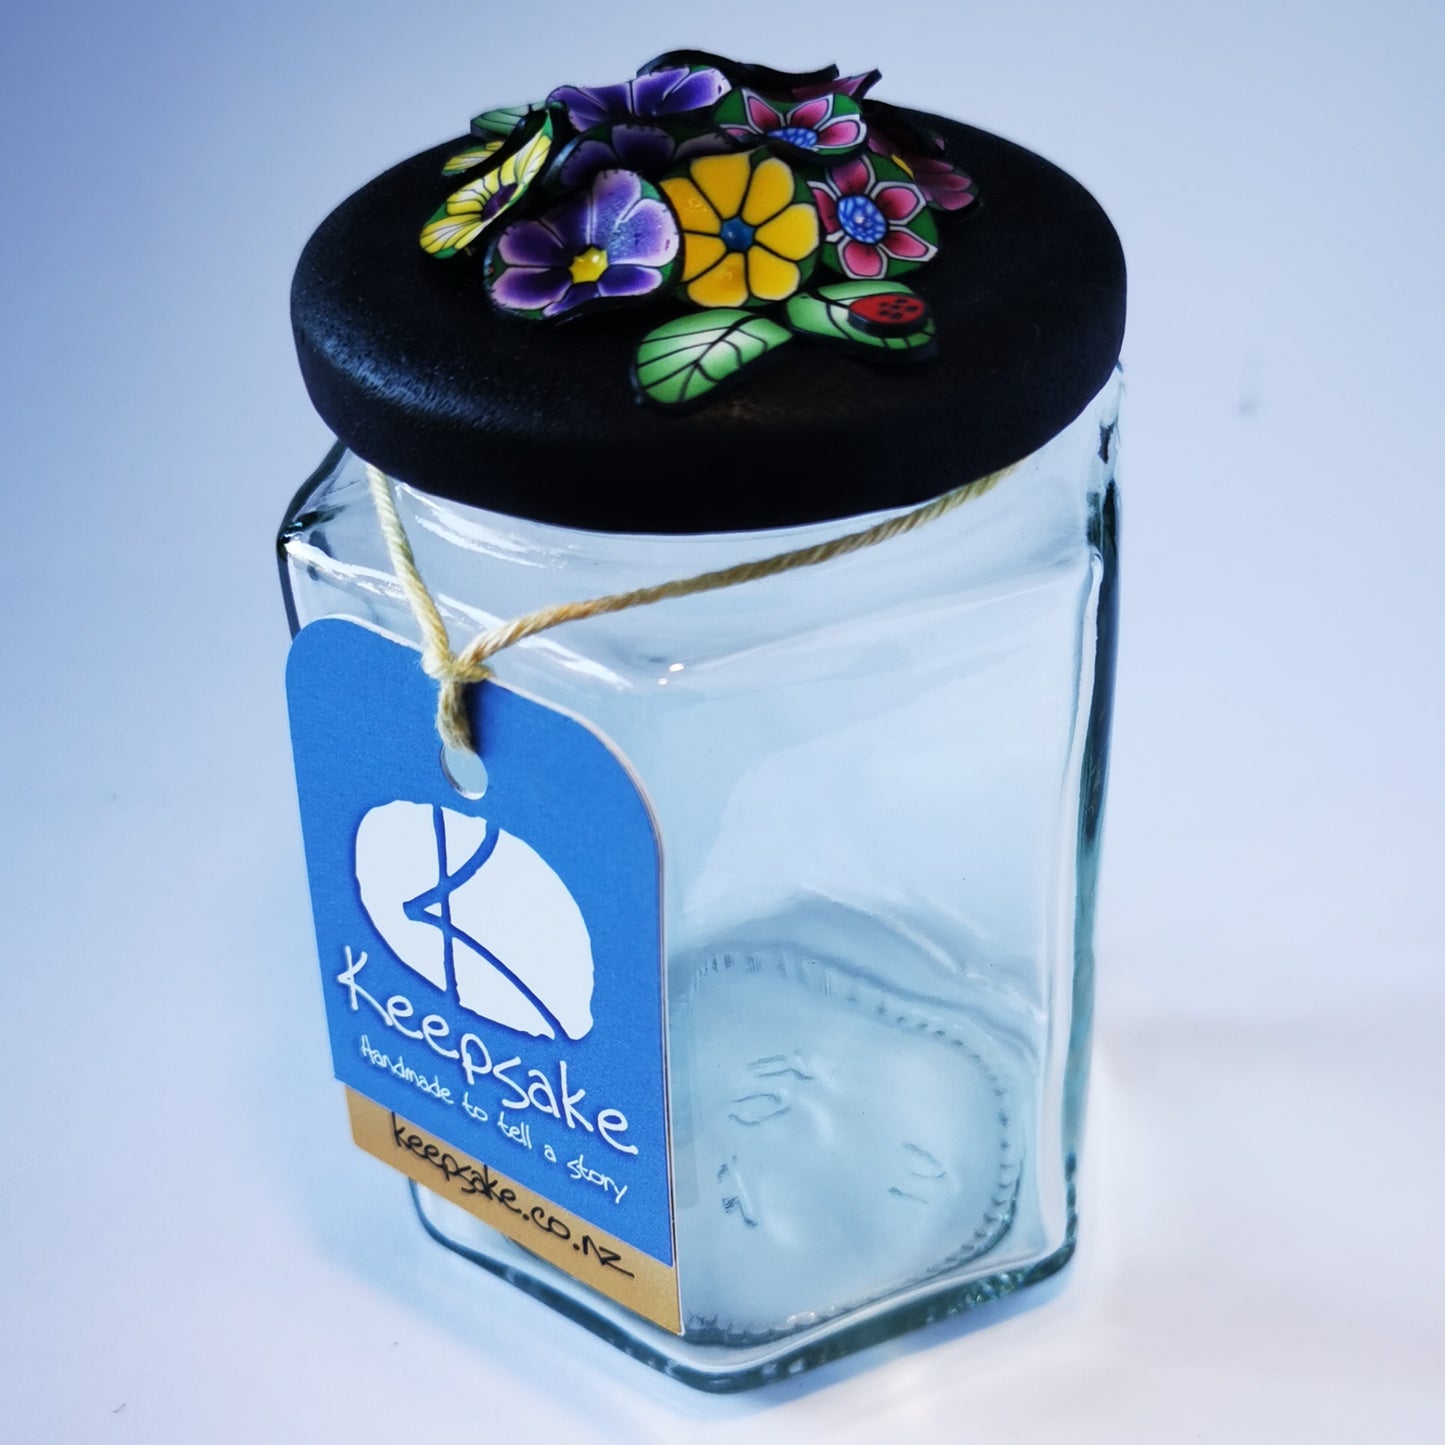 270ml glass hexagonal  jar and lid hand-decorated in New Zealand, with  an air-tight lid decorated with colourful polymer clay flowers. Ready to be filled with fudge, sweets or other treasures.